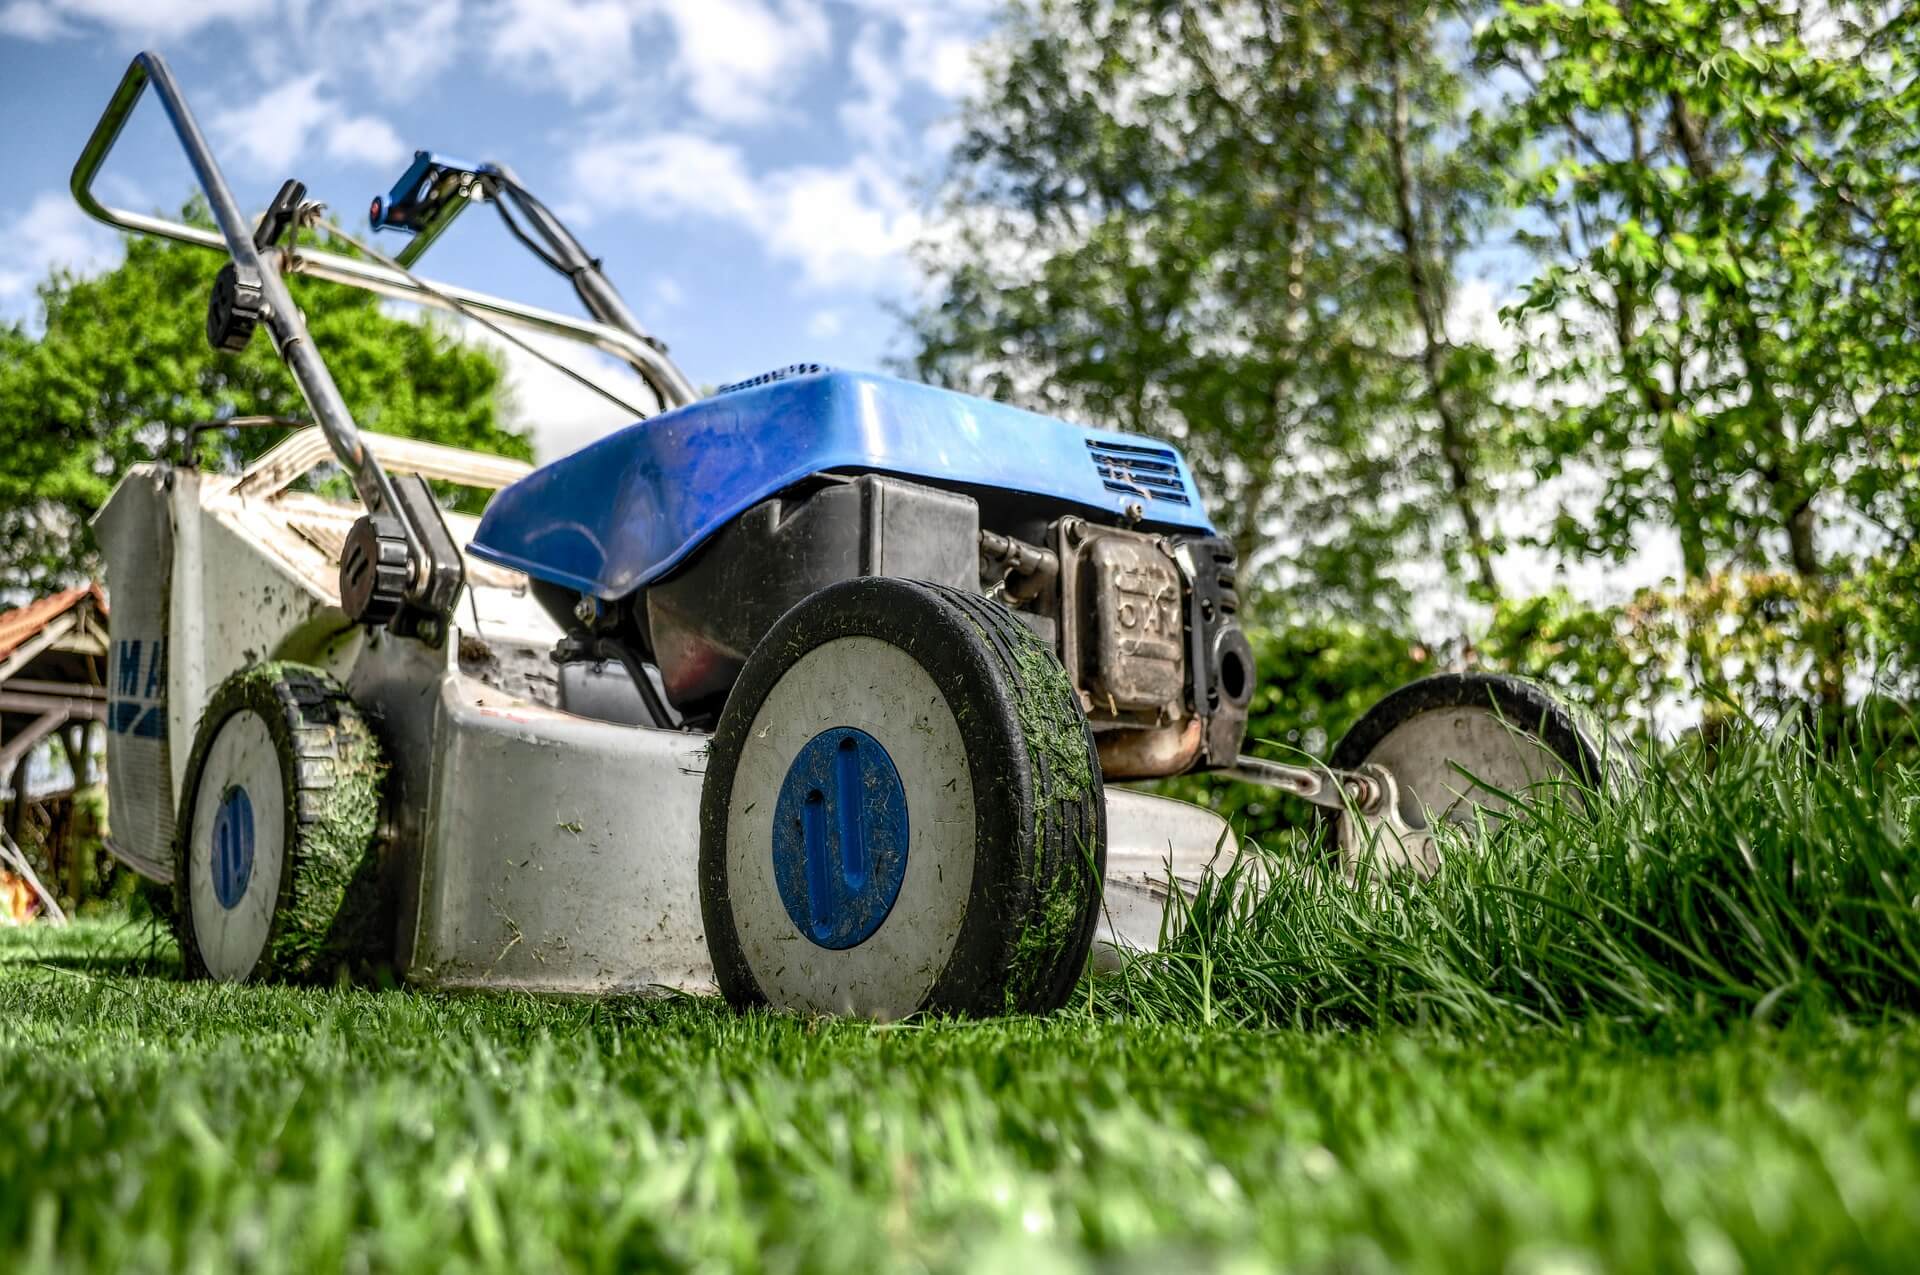 G&G Garden and Lawn Care - Mowing Safely